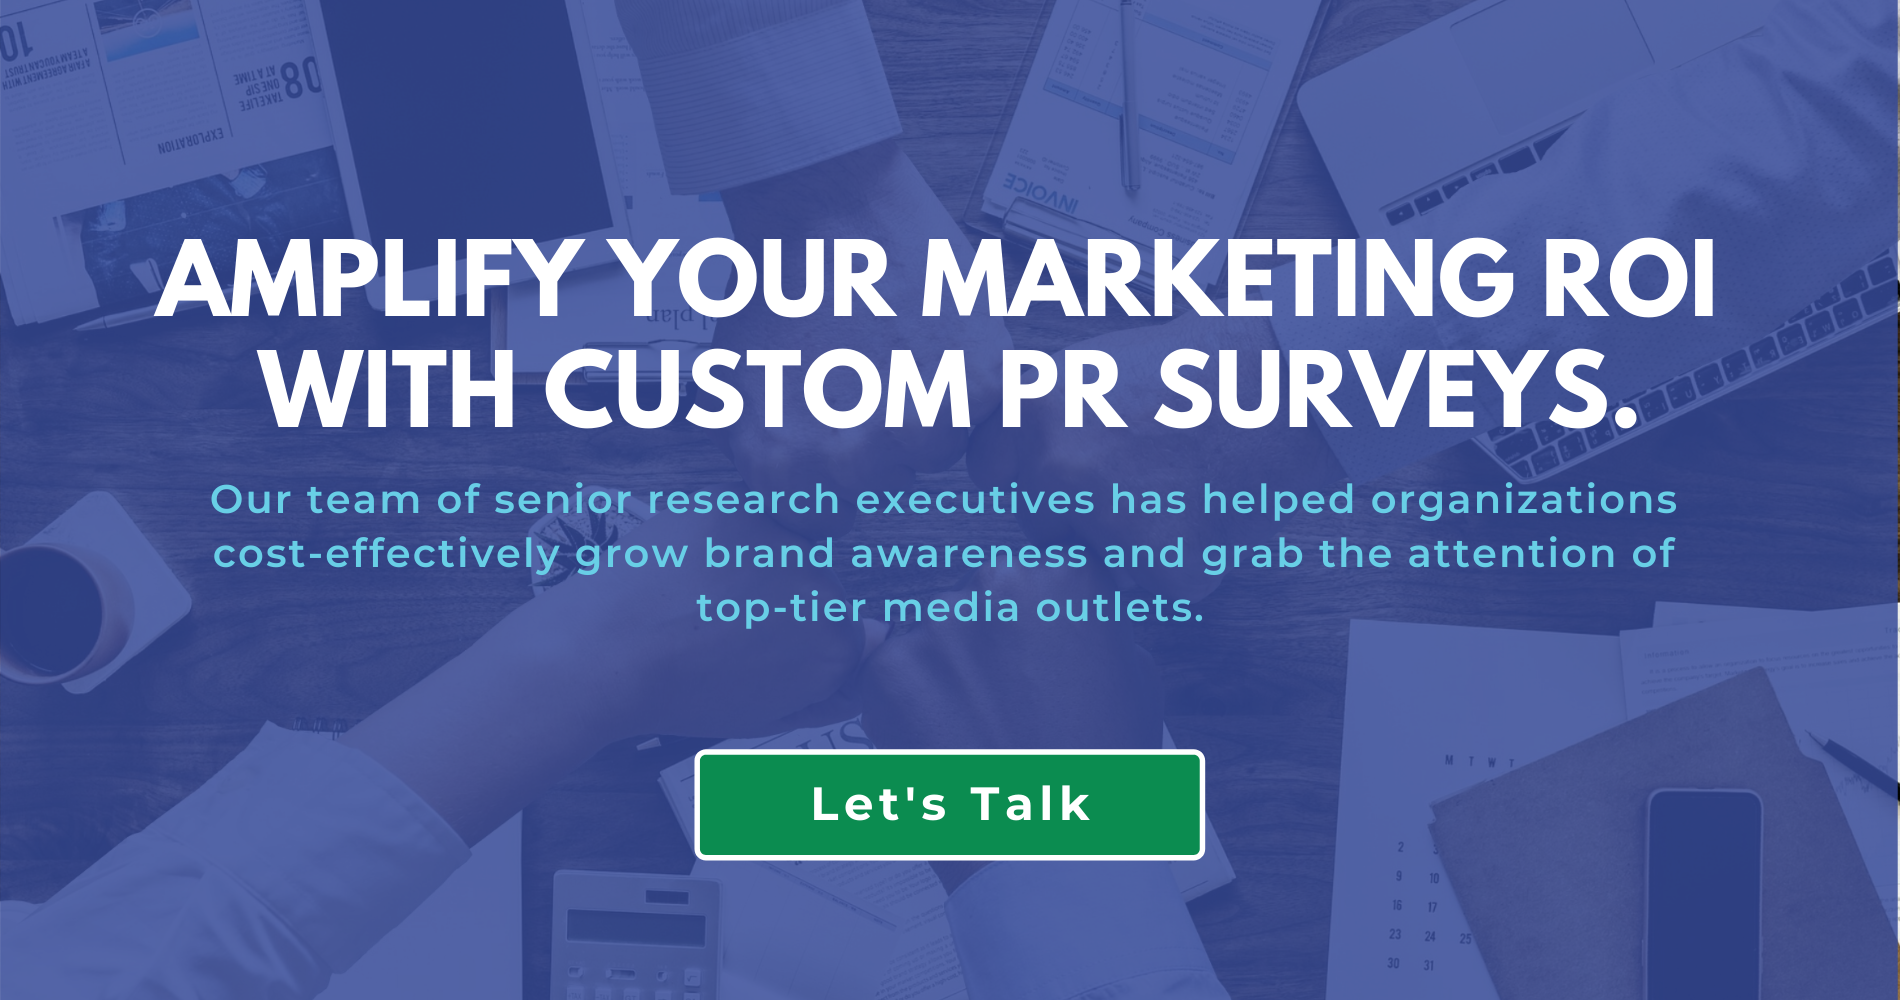 Quote text: Amplify your marketing ROI  with custom PR surveys.